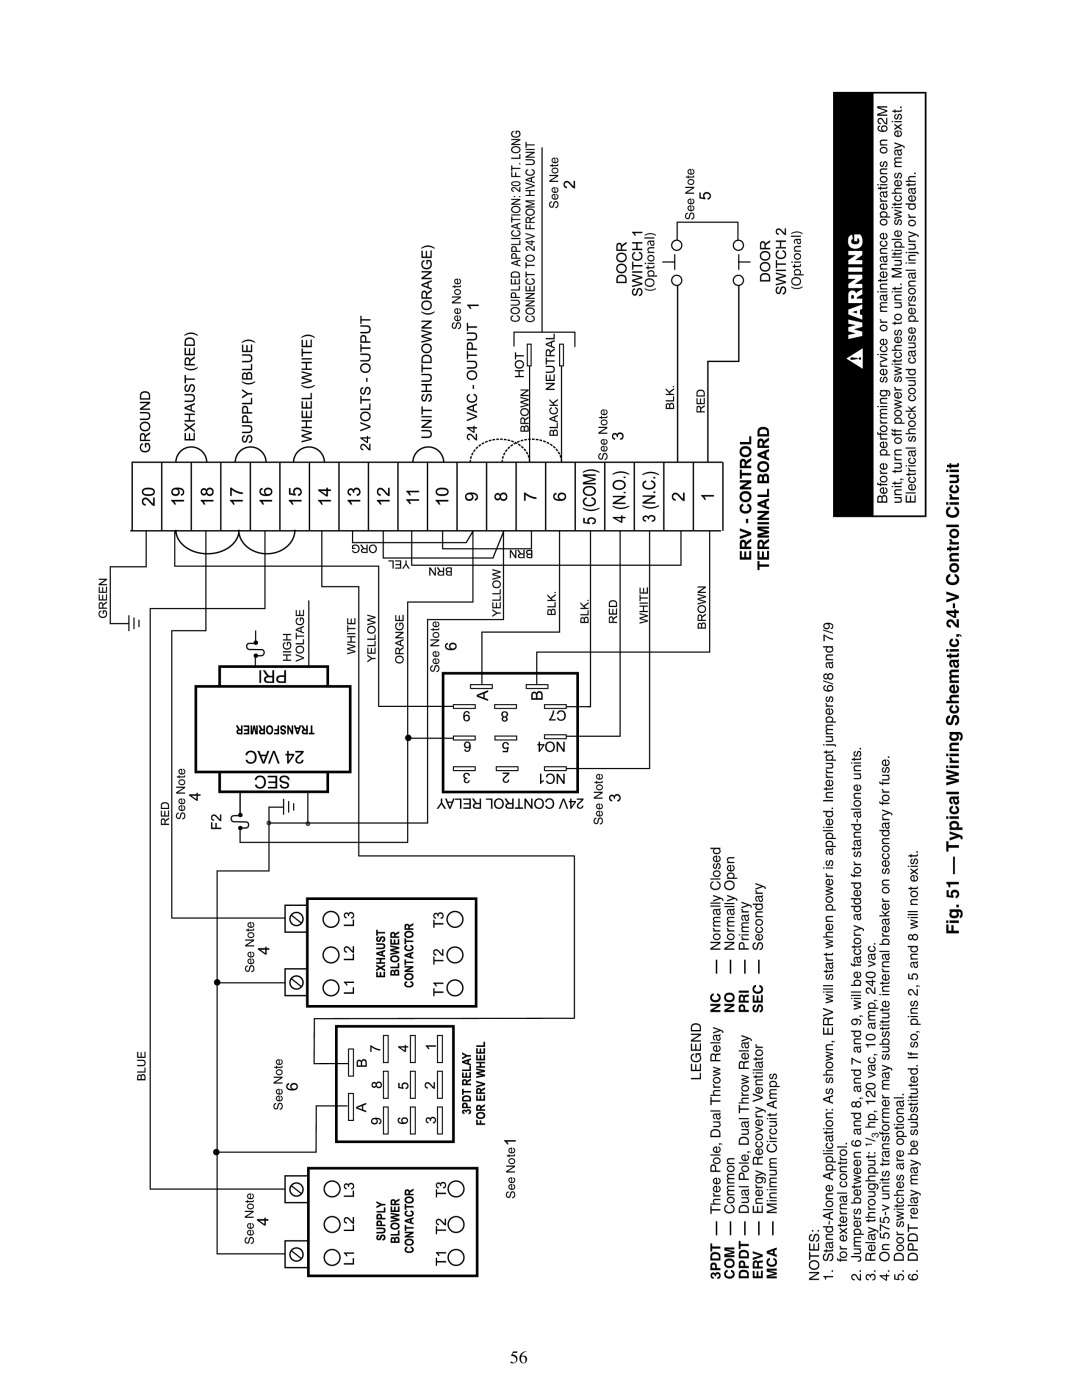 Carrier 62ME, 62MC, 62MD, 62MB specifications Typical Wiring Schematic, 24-V Control Circuit 